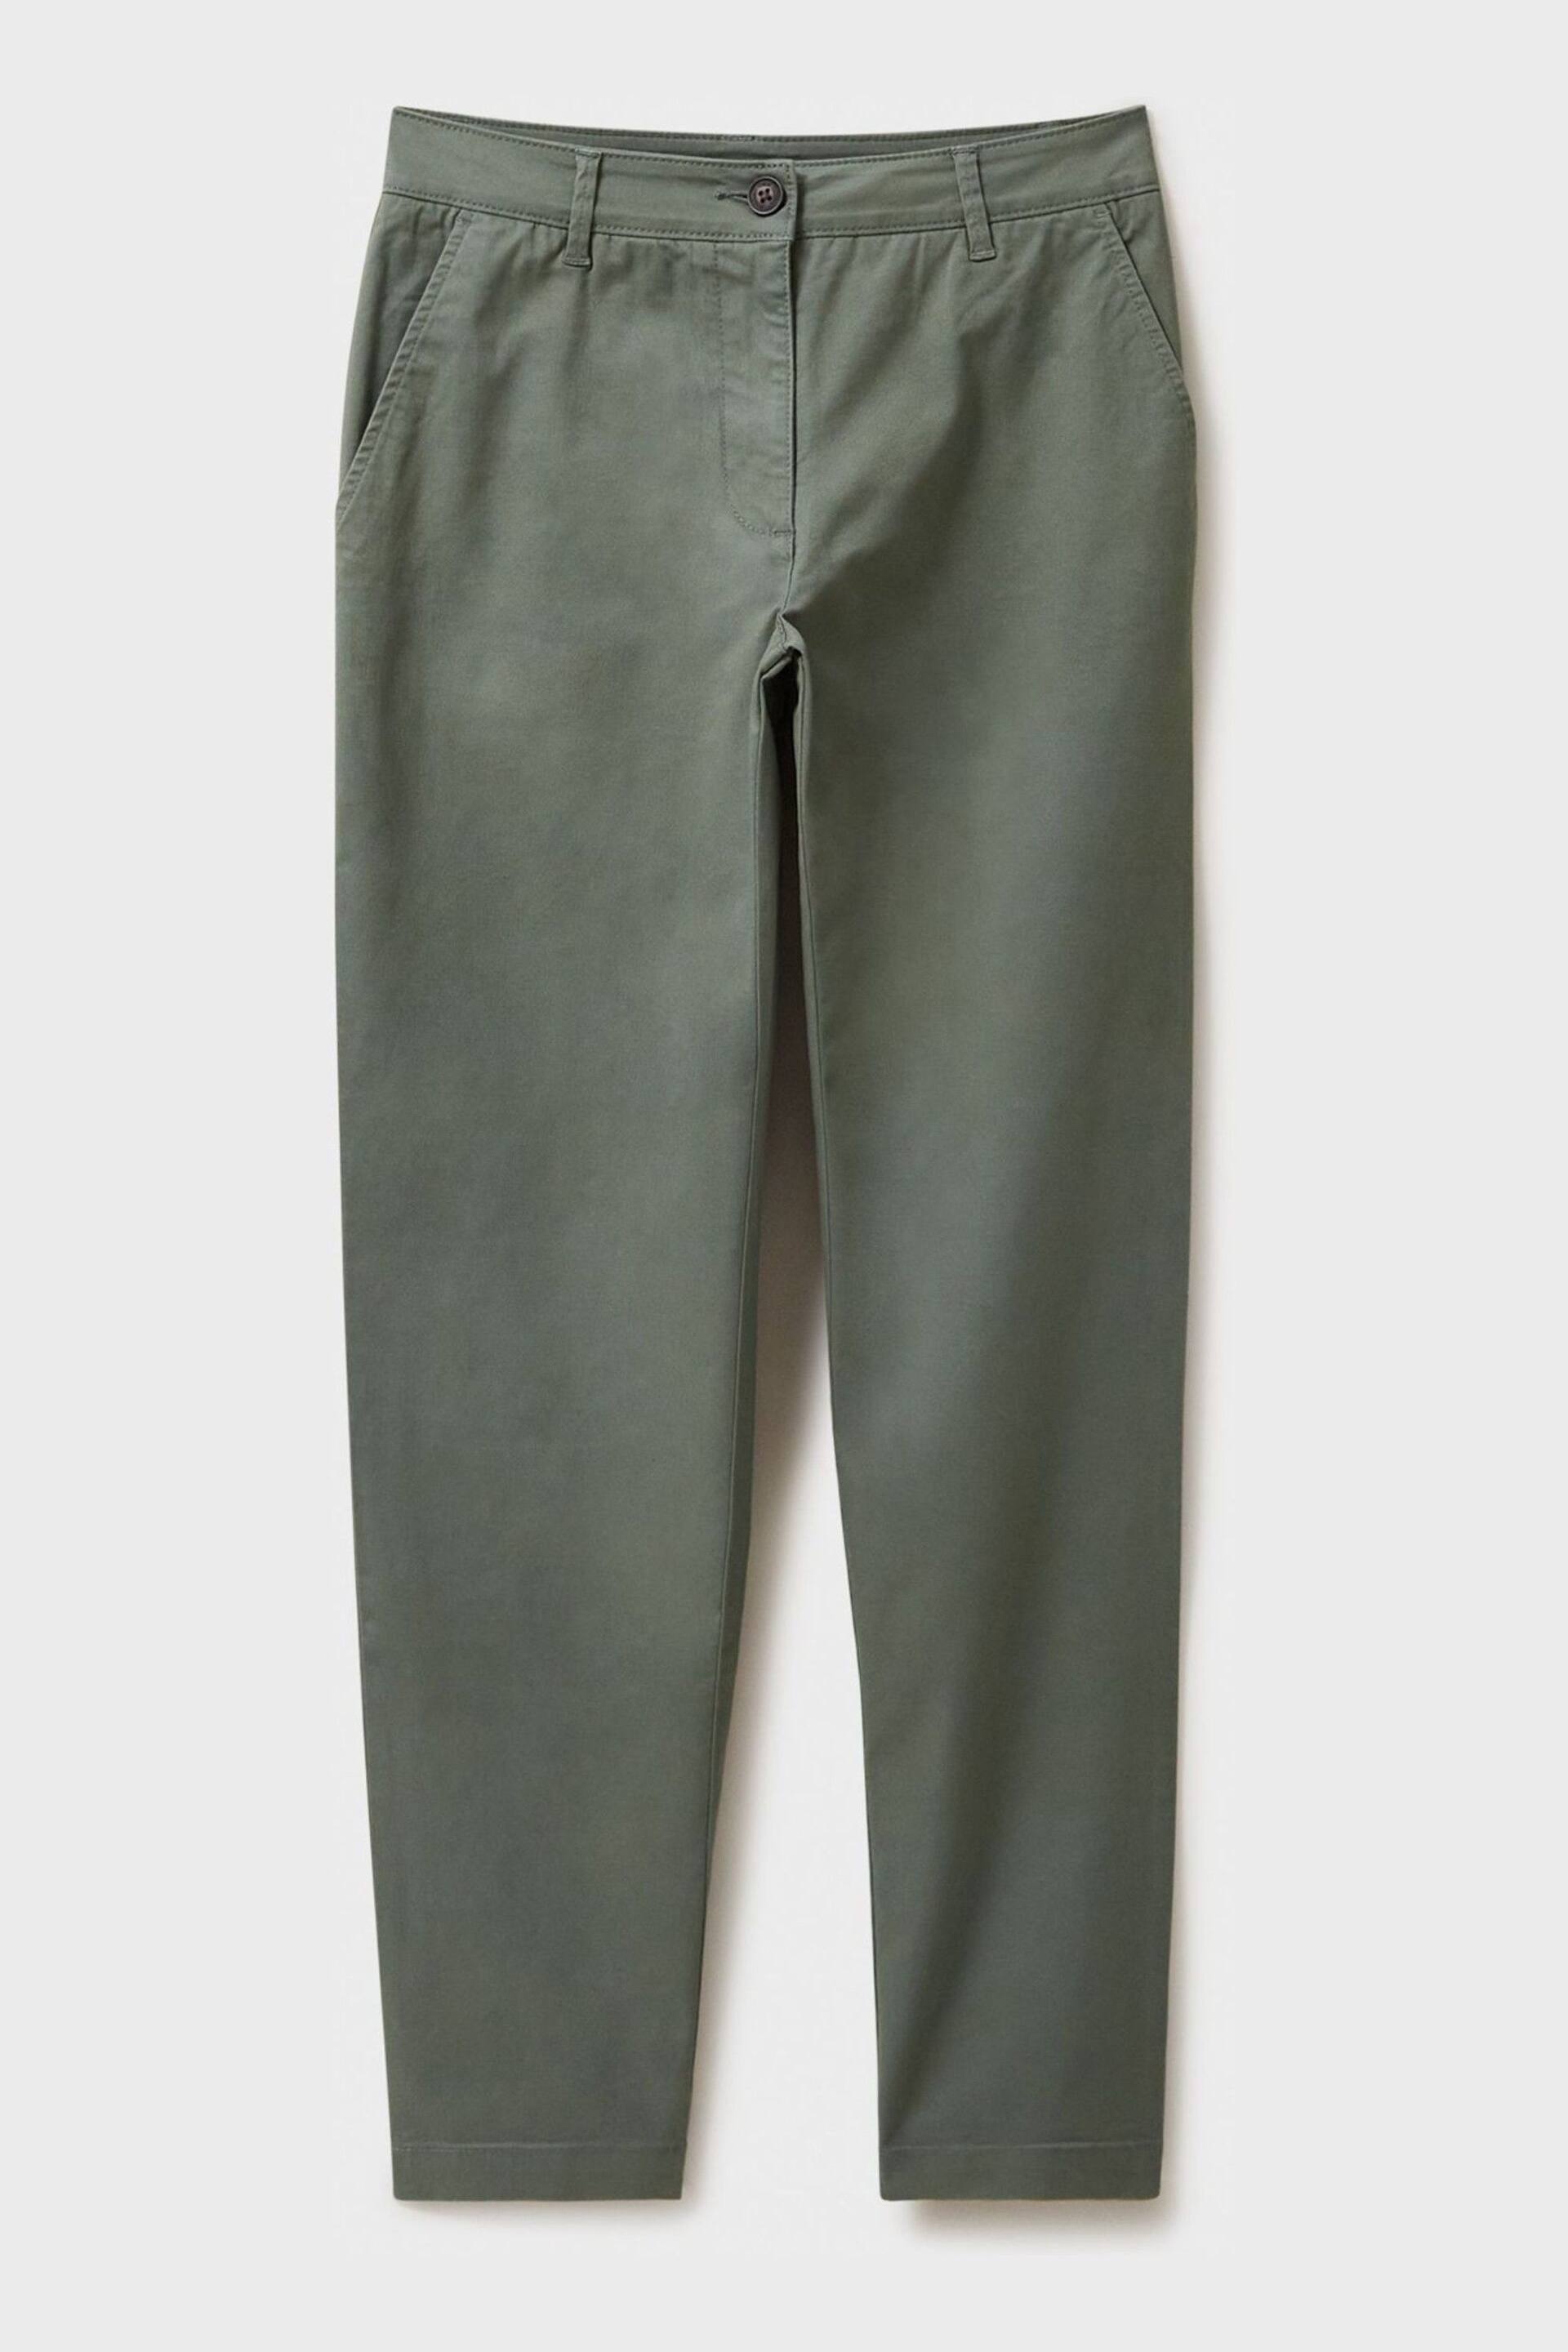 Crew Clothing Salcombe Chino Trousers - Image 5 of 5